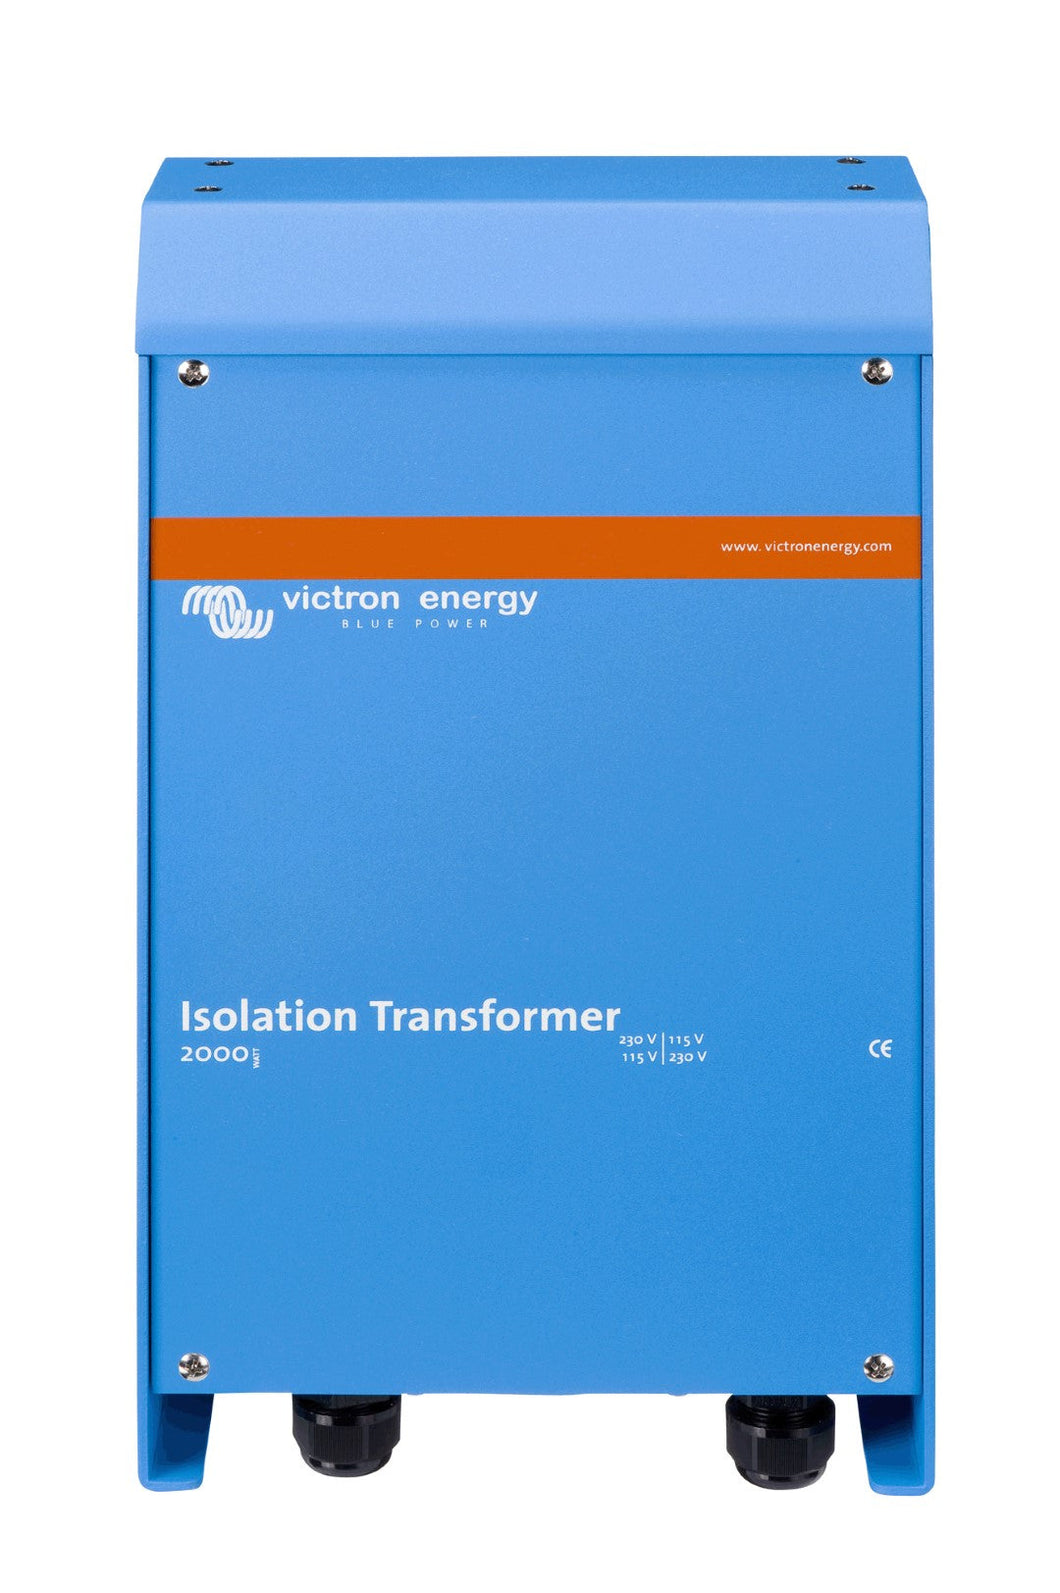 Isolation Transformers. Prices from